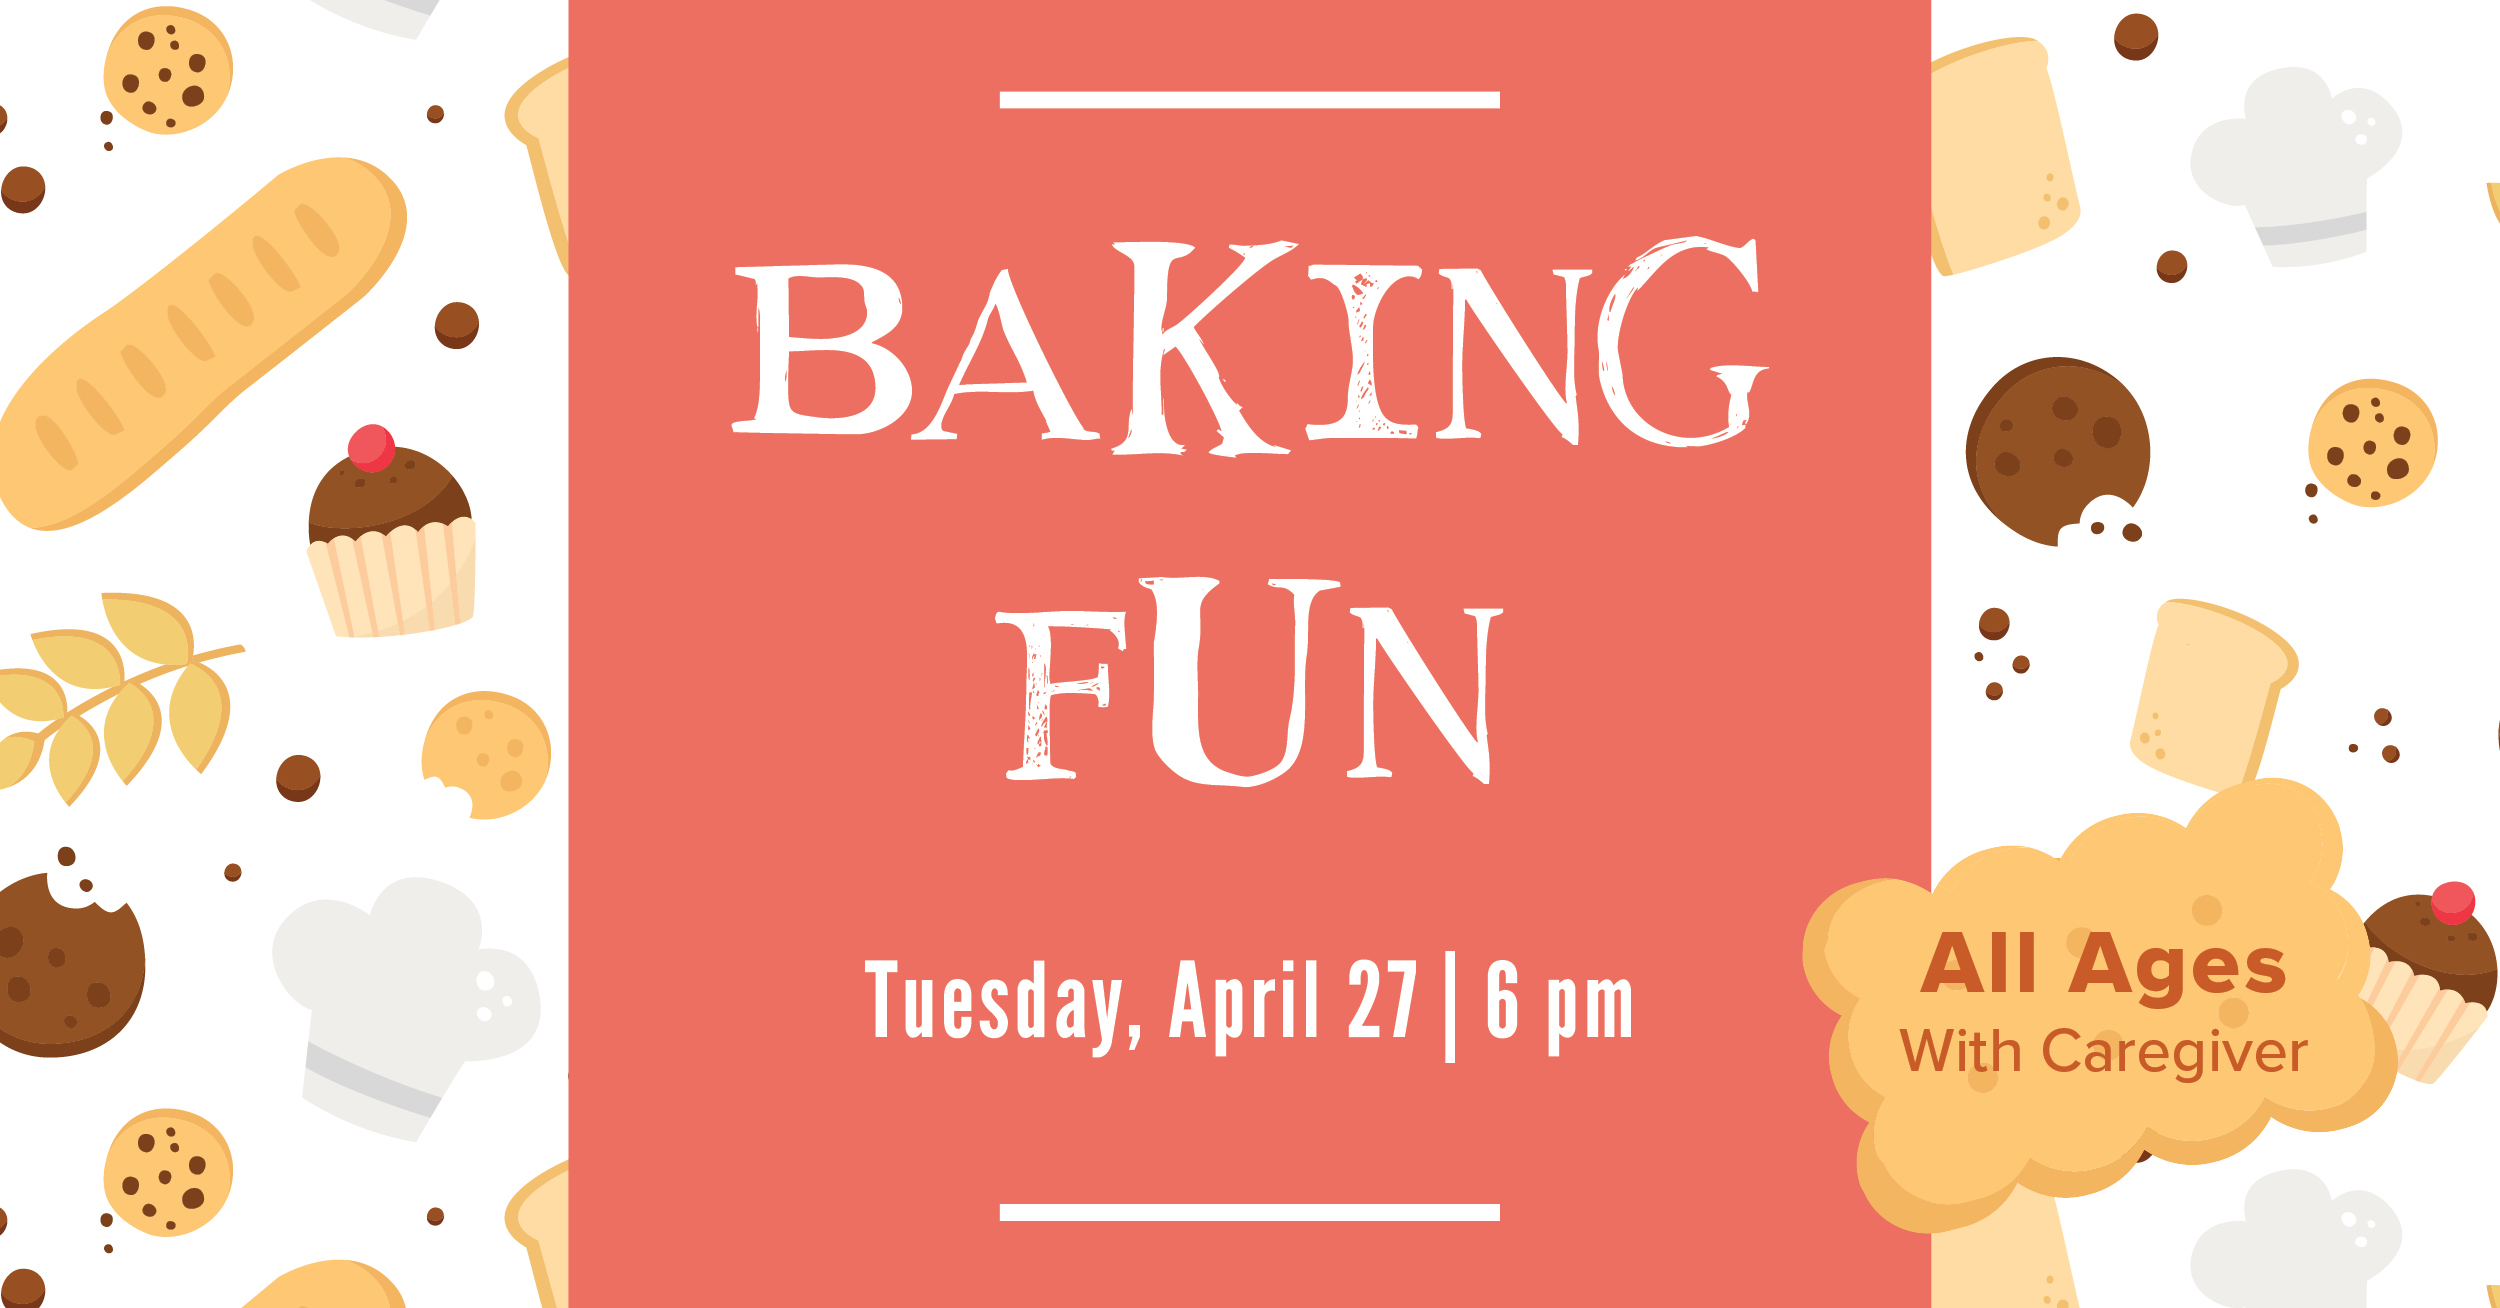 Baking Fun Tuesday, April twenty-seven at 6pm. All ages with caregiver.